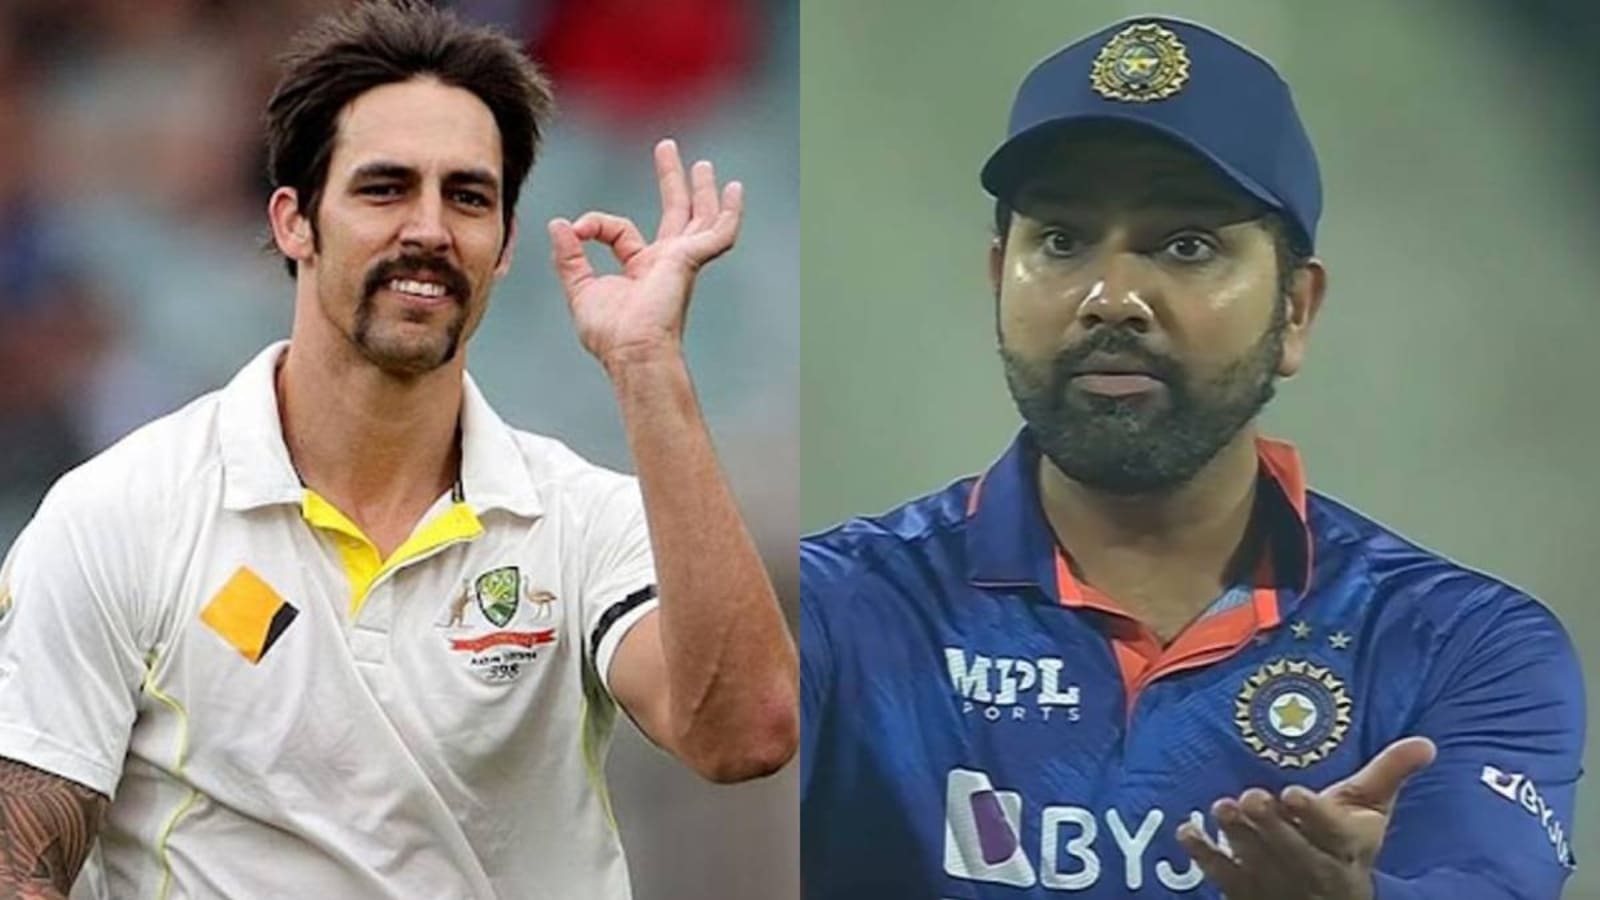 He's that player...': Mitchell Johnson snubs Rohit in huge IND captaincy remark | Cricket - Hindustan Times